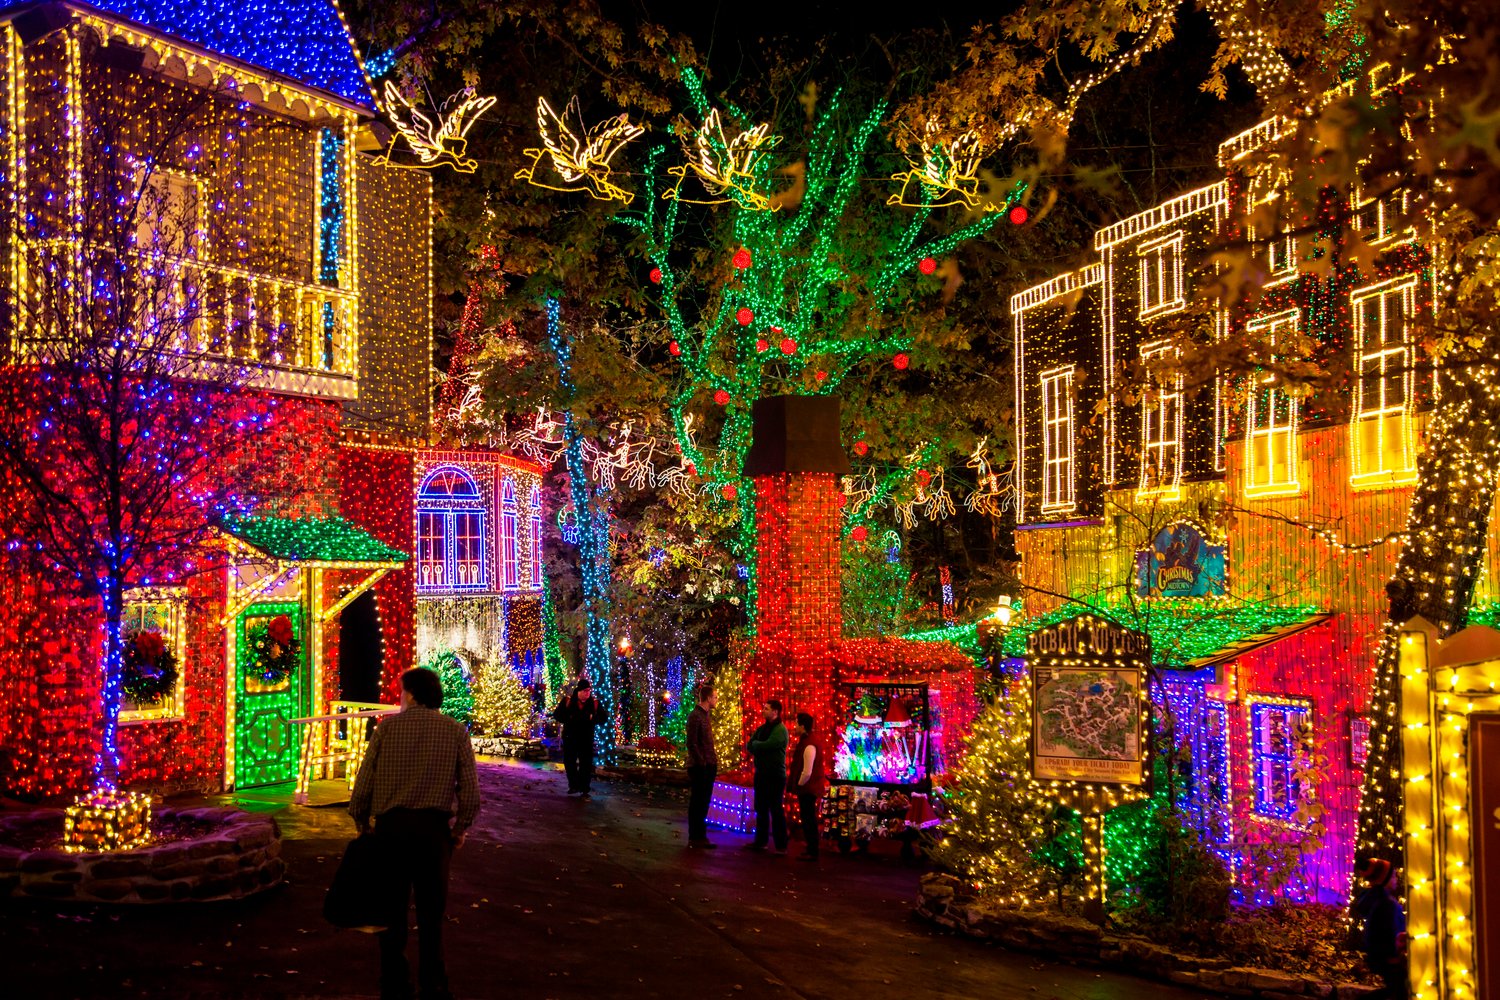 An Old Time Christmas showcases 6.5 million lights at the Branson theme park.